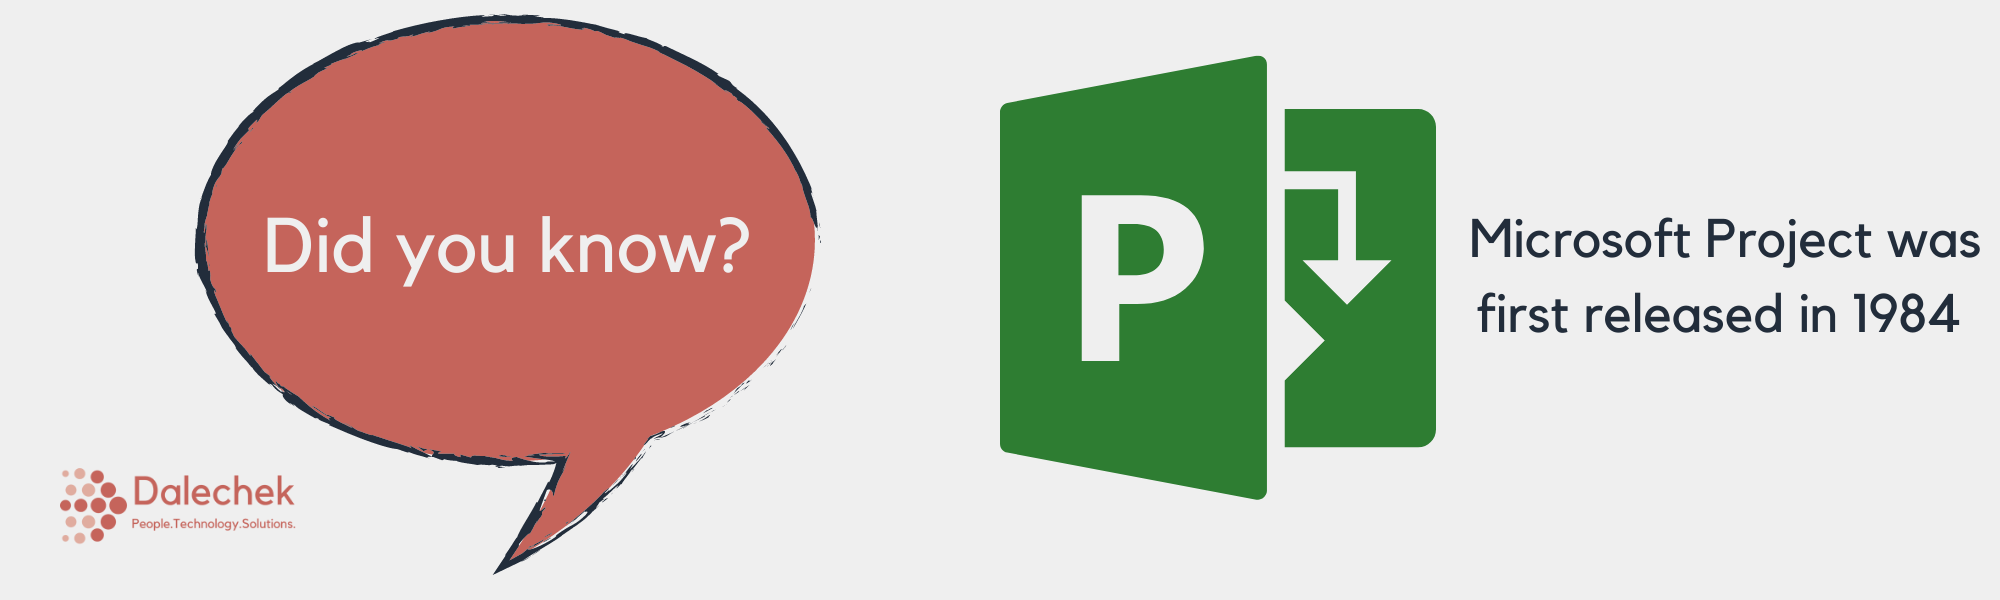 Microsoft Project- What is Microsoft Project?